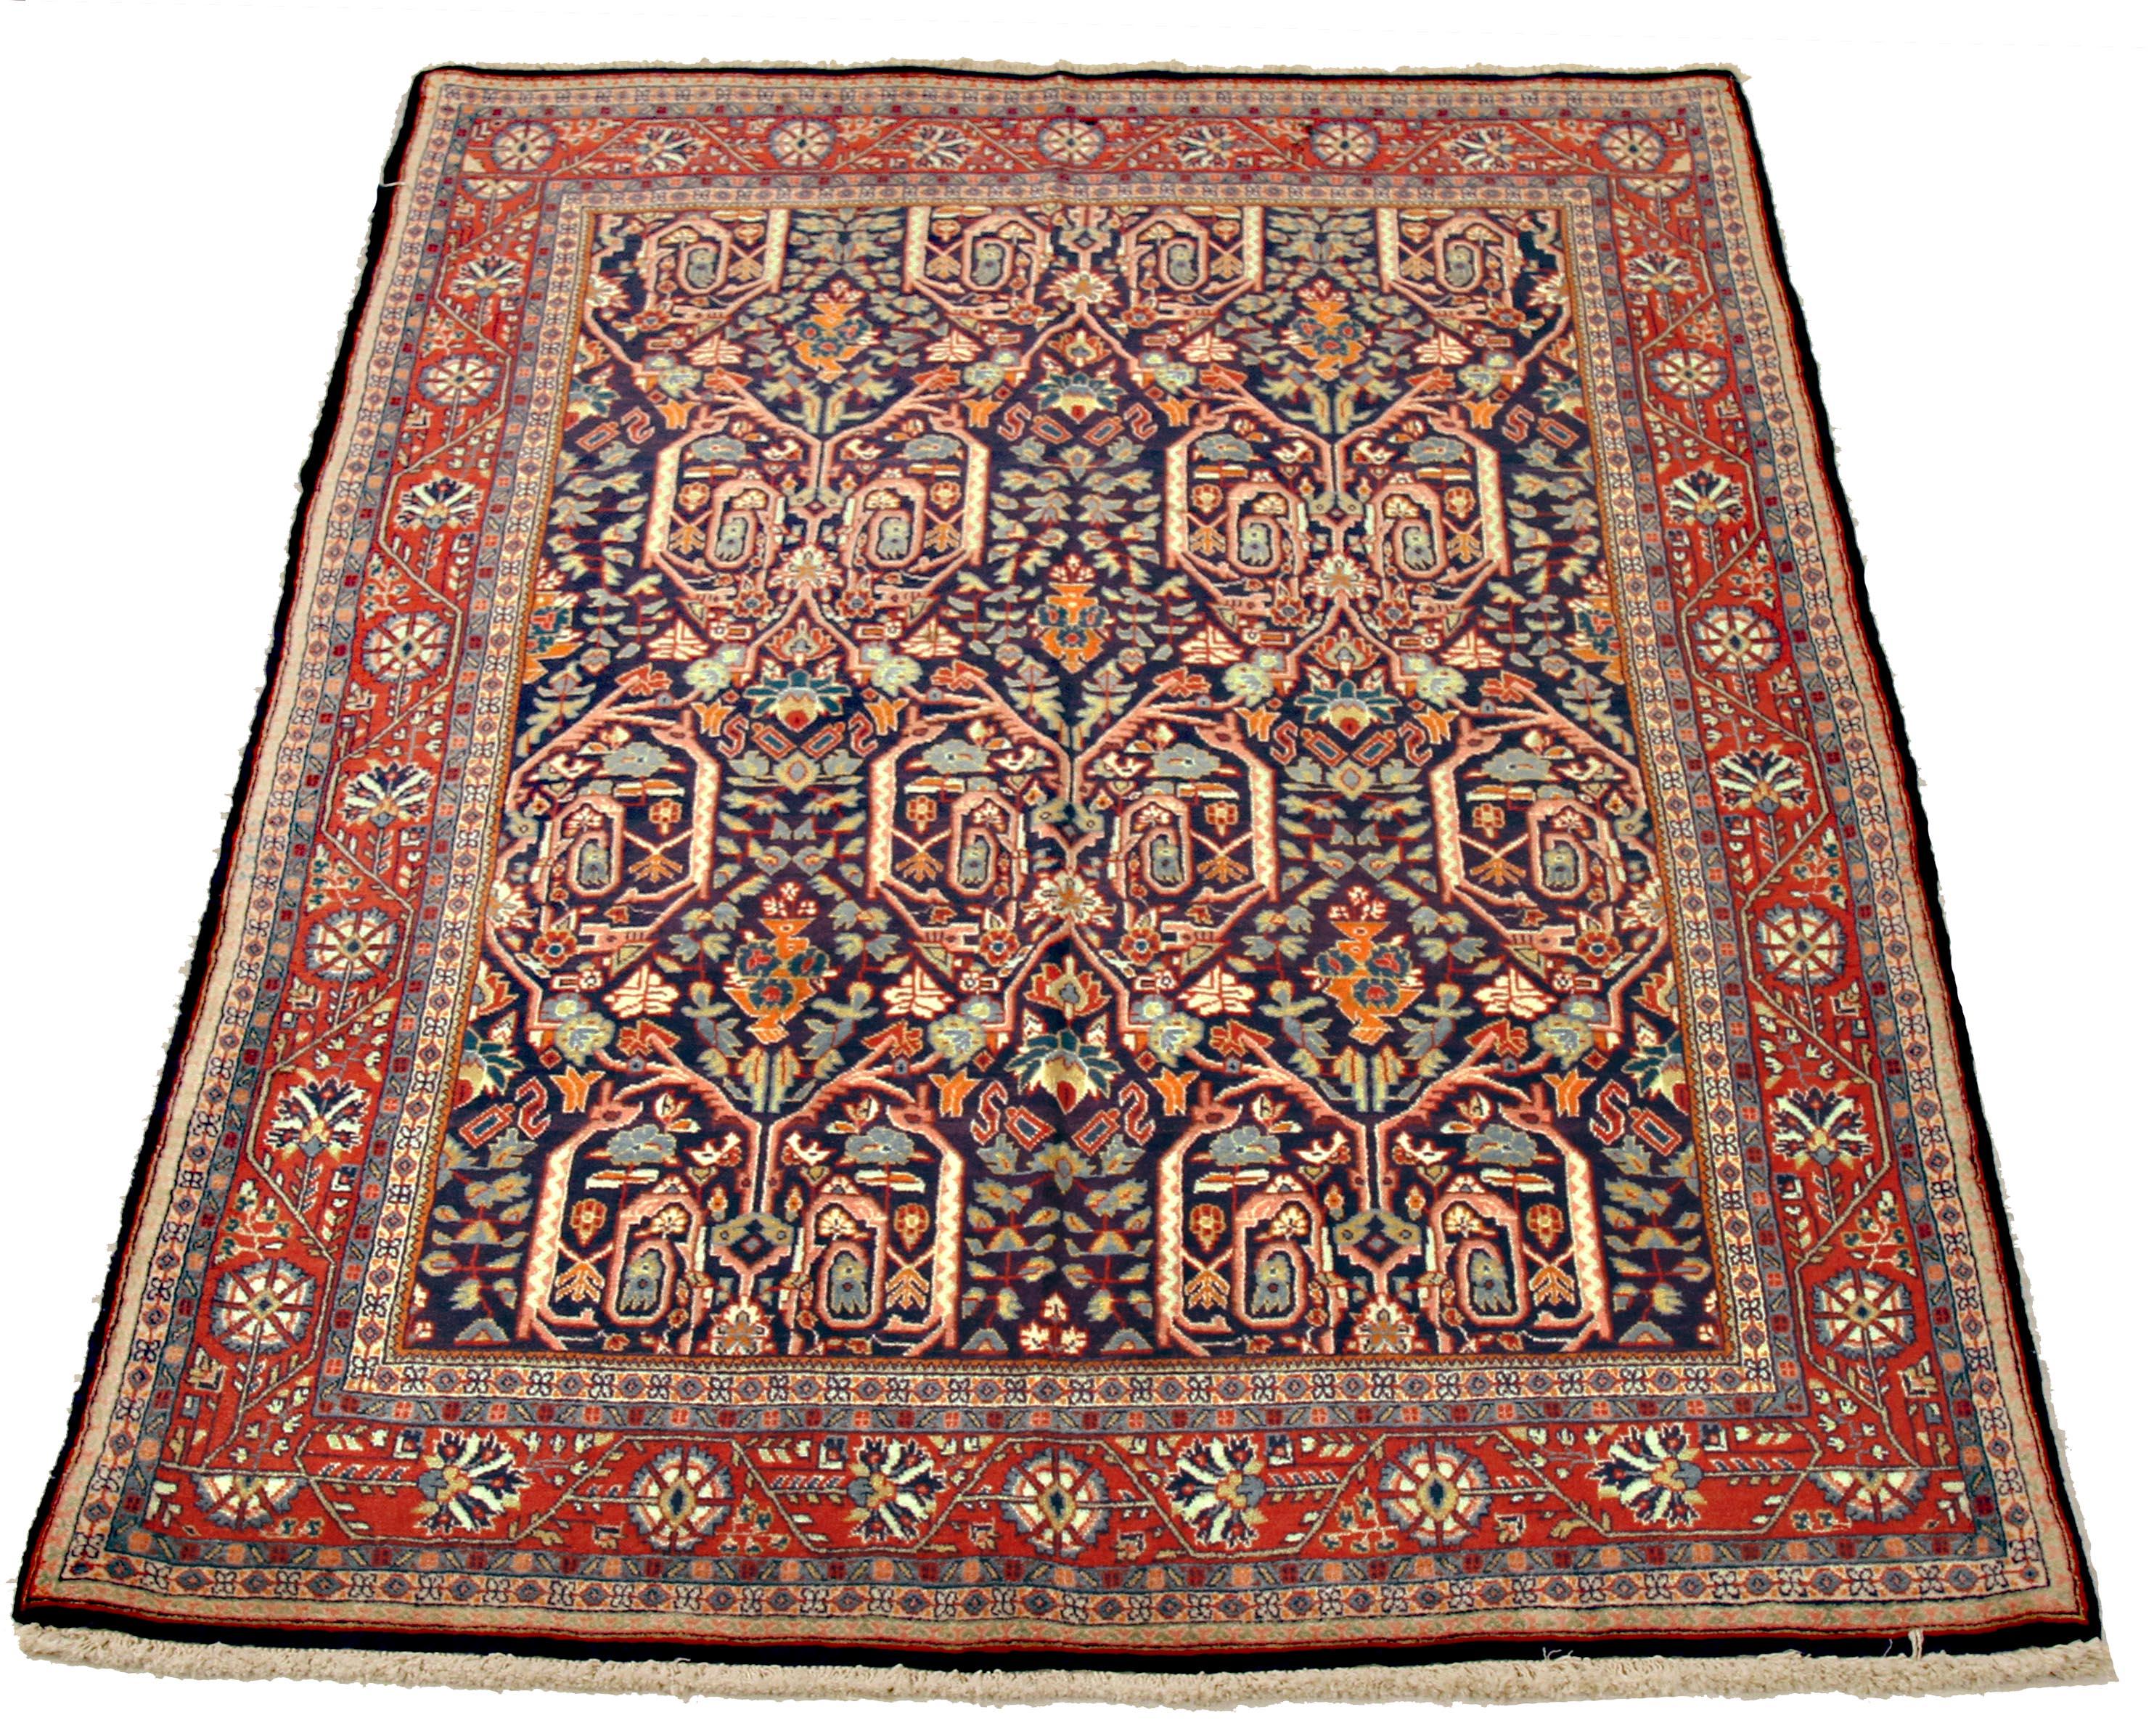 Antique Persian rug handwoven from the finest sheep’s wool and colored with all-natural vegetable dyes that are safe for humans and pets. It’s a traditional Sarouk design featuring colored botanical details. It has a rich navy blue center field with